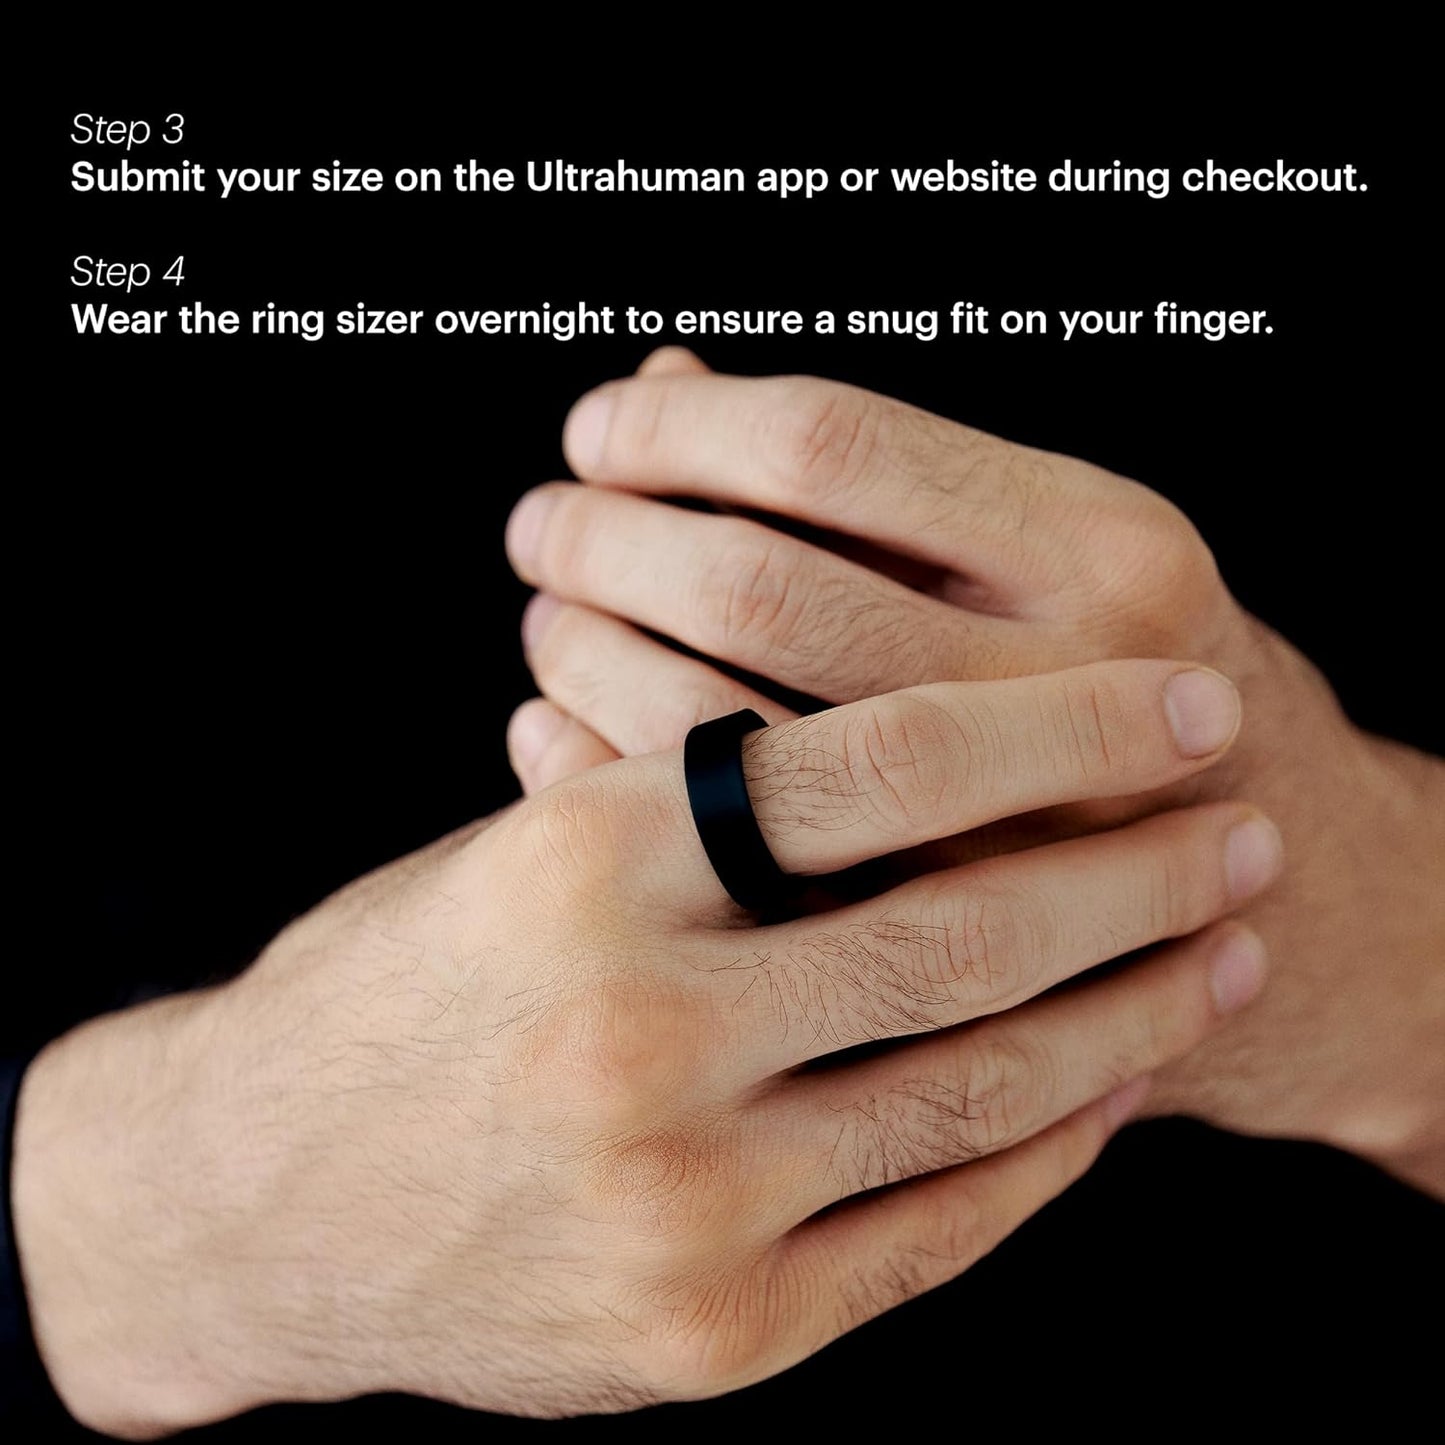 ULTRAHUMAN AIR Ring Sizing Kit | Choose from Sizes 5-14 | Sizing Guide for Your Smart Wearable Ring